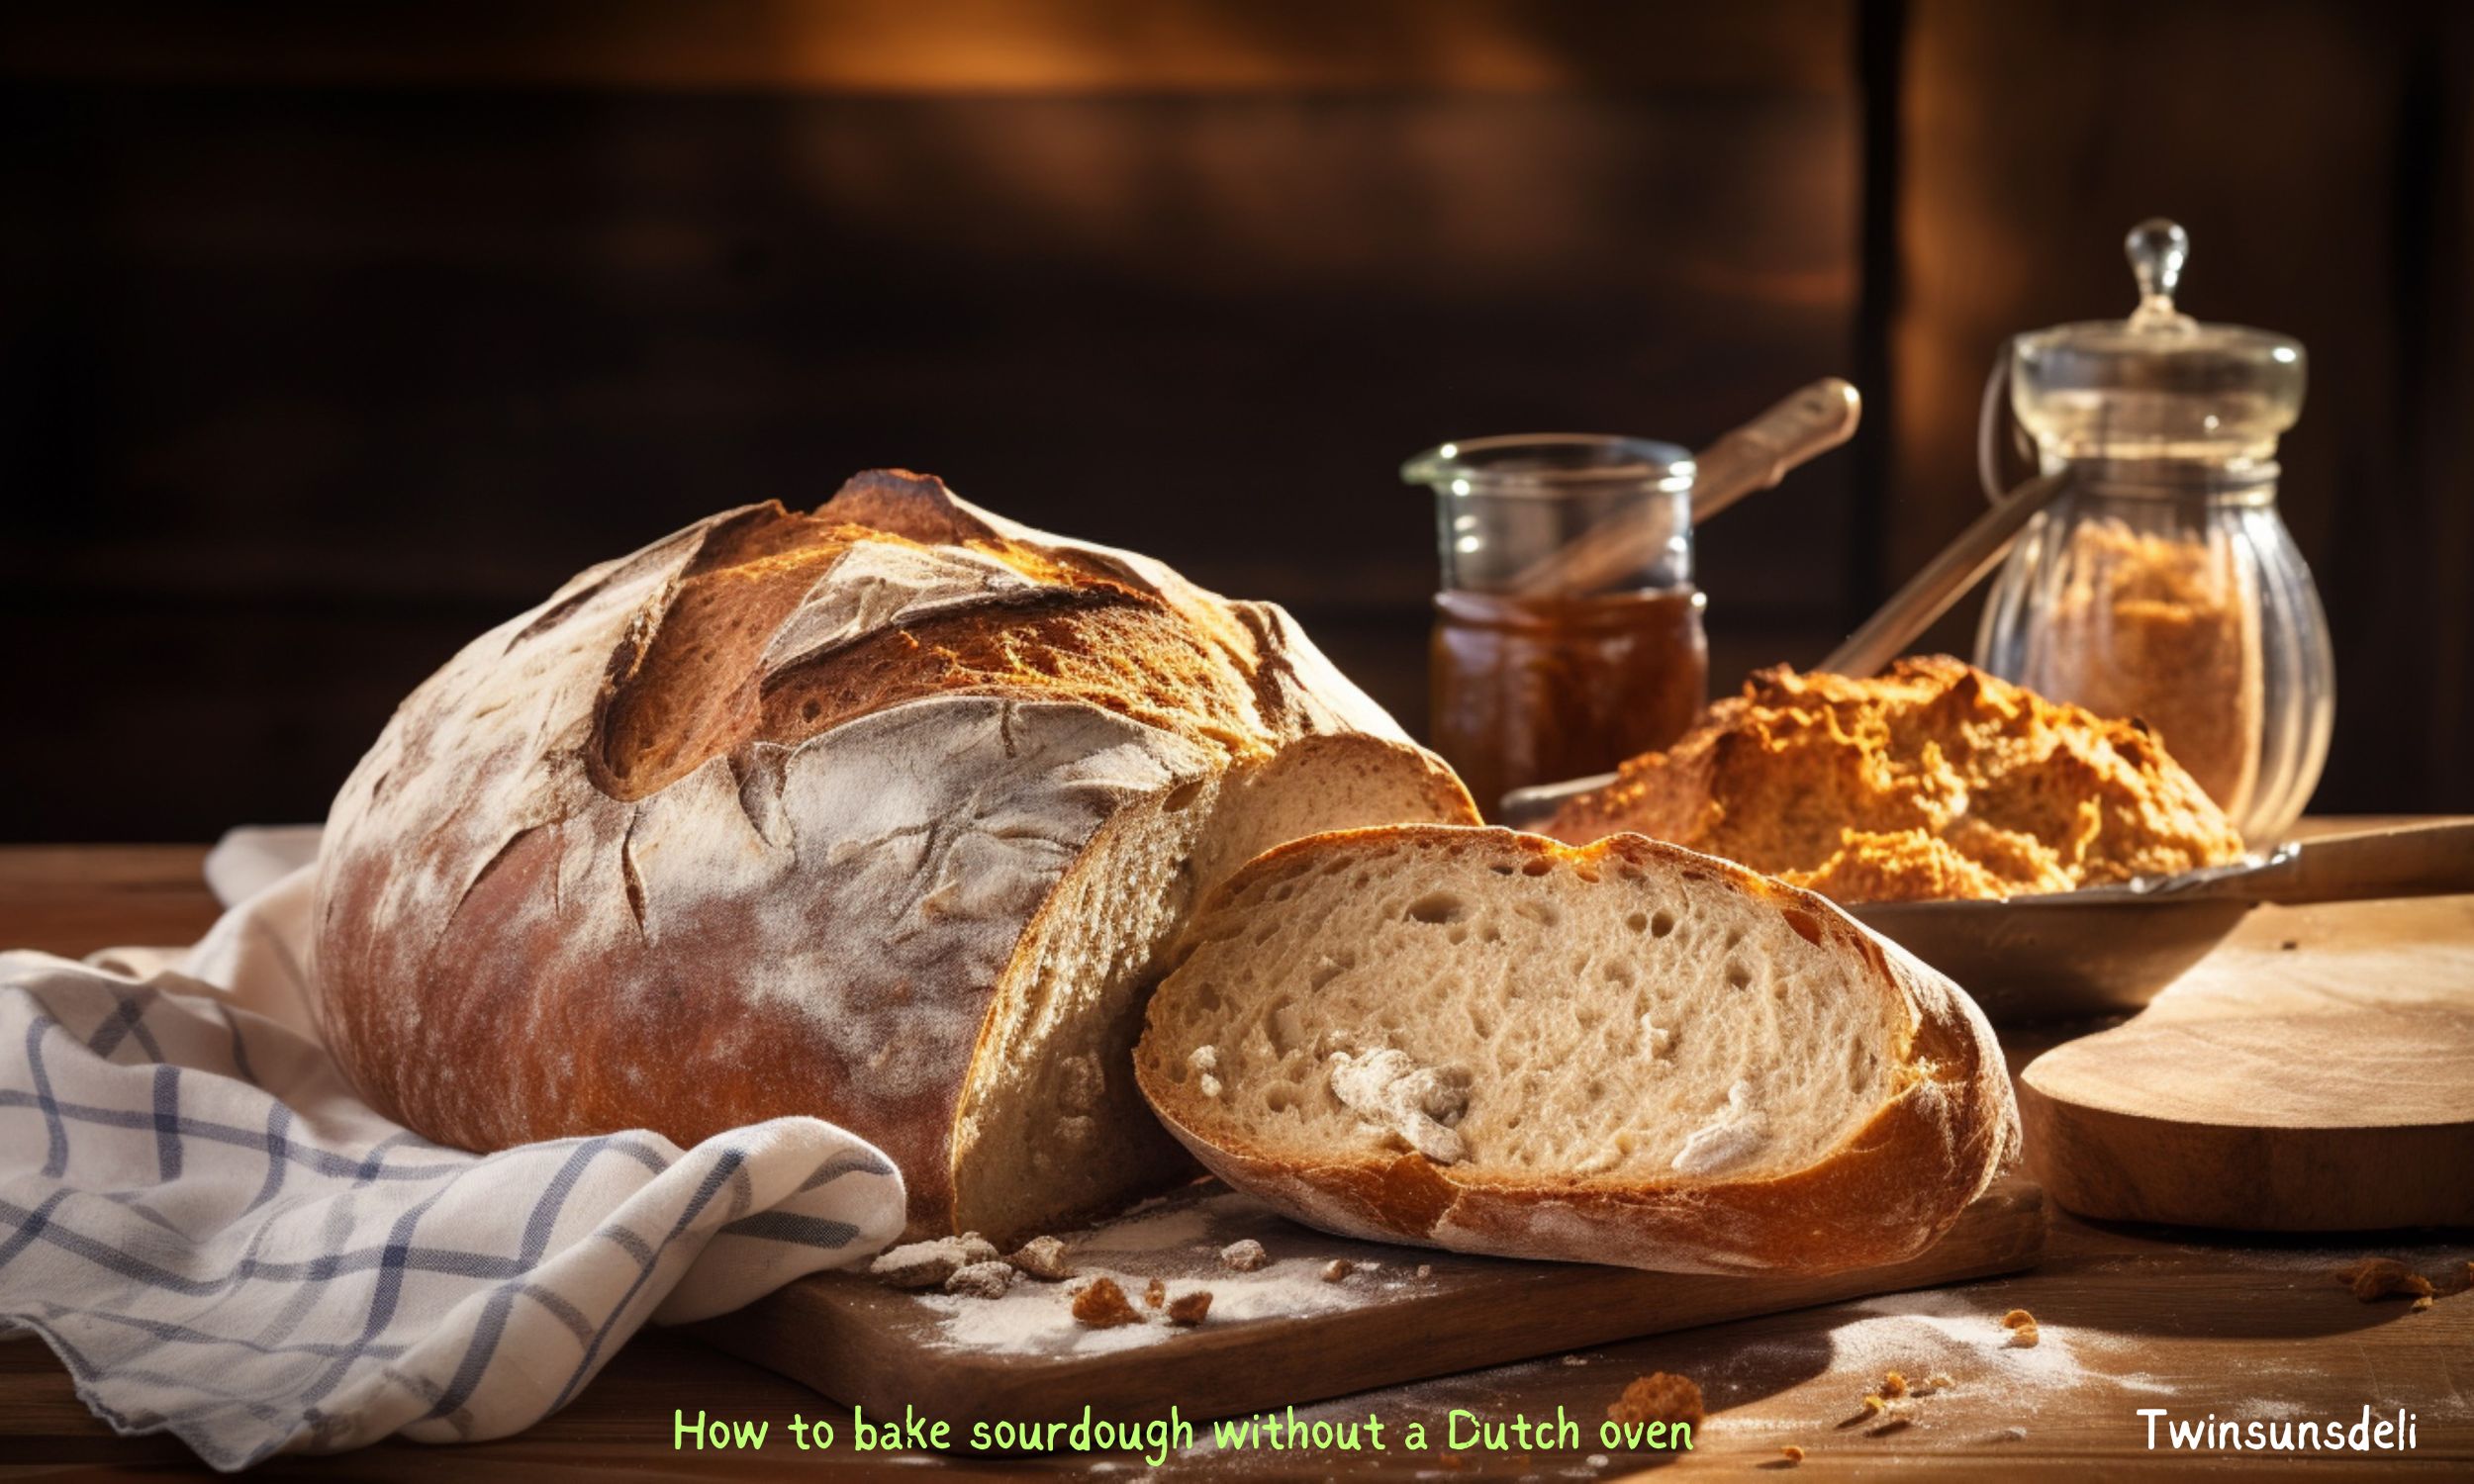 How to bake sourdough without a Dutch oven